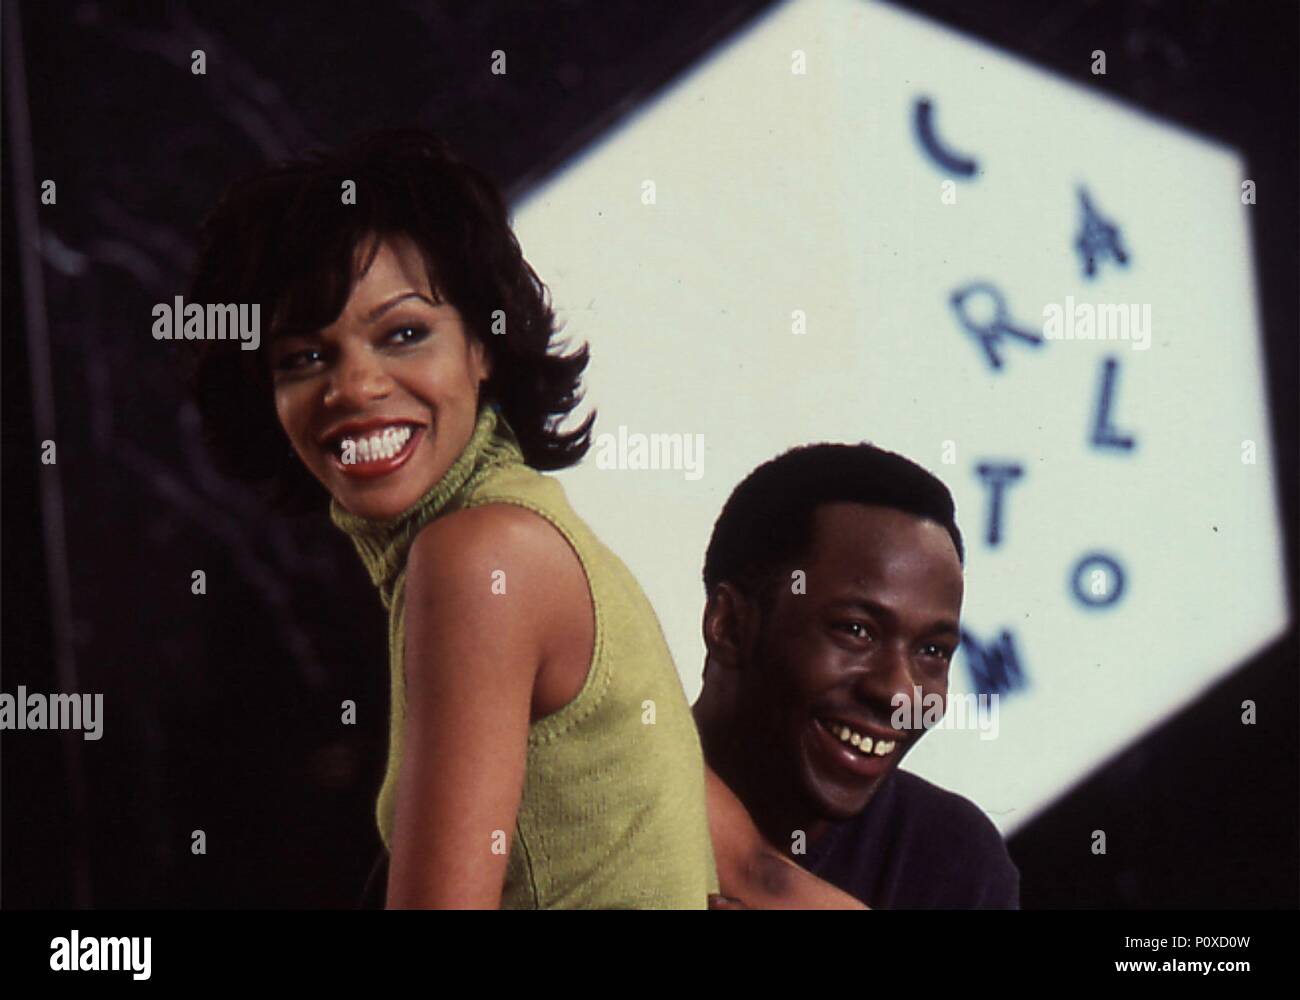 Original Film Title: TWO CAN PLAY THE GAME.  English Title: TWO CAN PLAY THE GAME.  Film Director: MARK BROWN.  Year: 2001.  Stars: WENDY RAQUEL ROBINSON. Credit: COLUMBIA PICTURES / Album Stock Photo